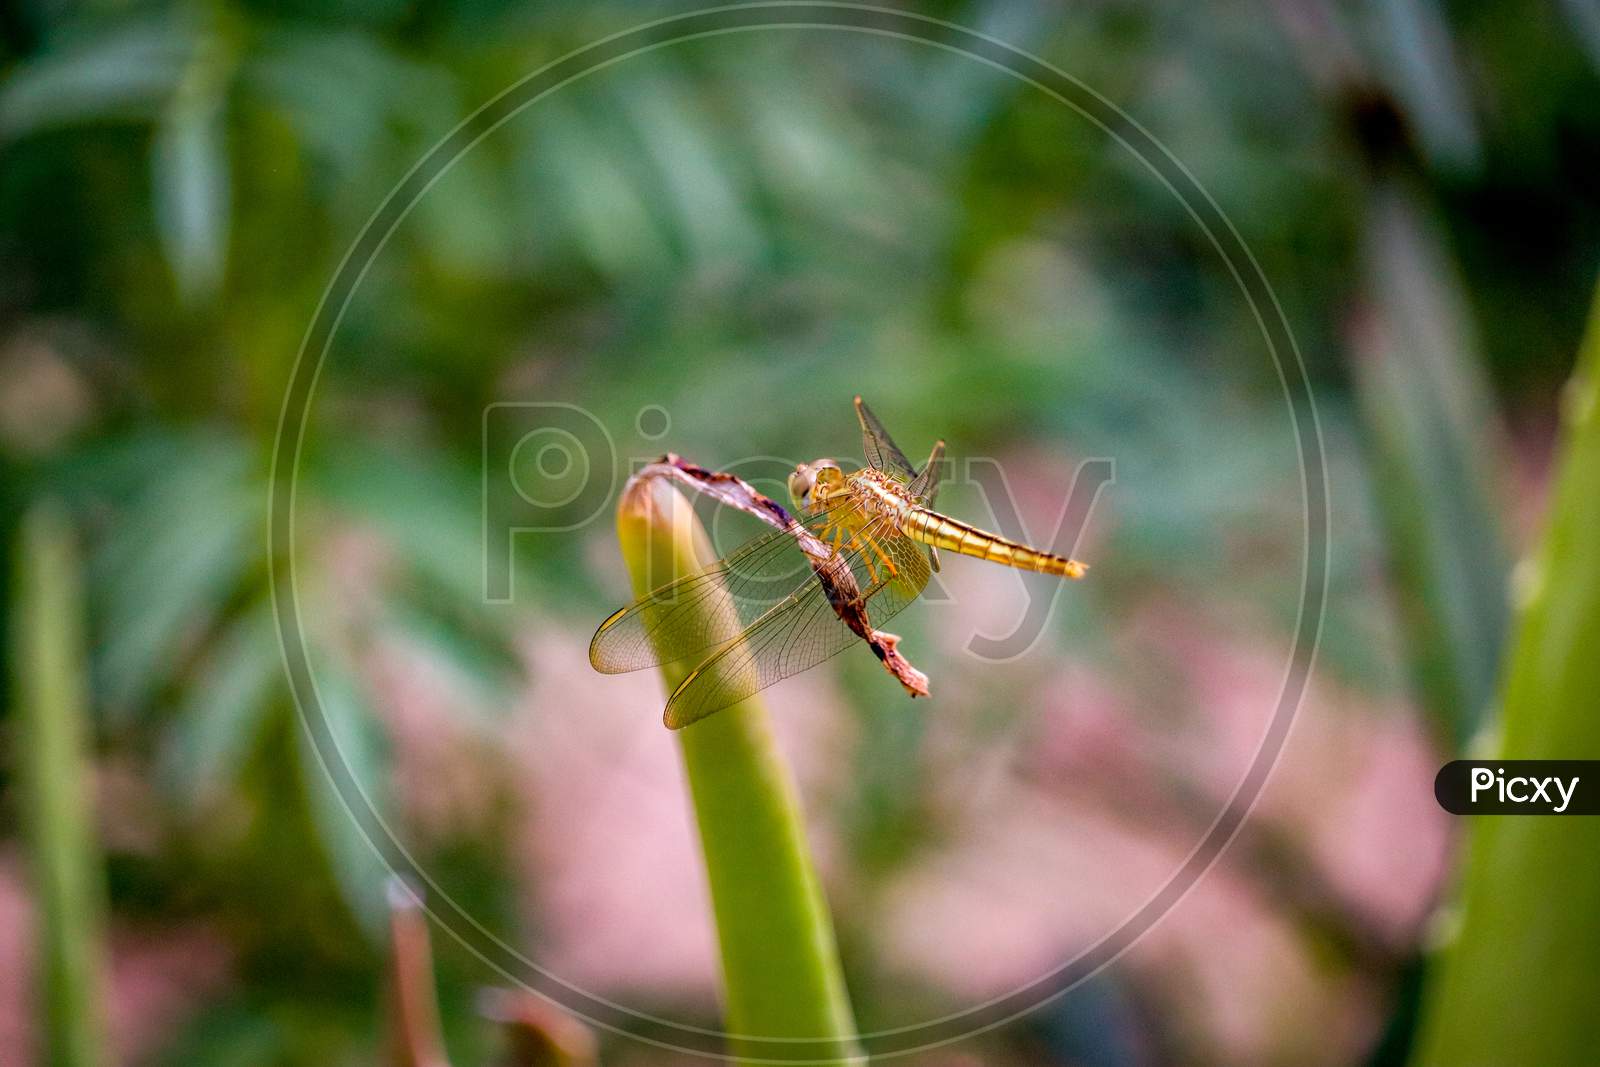 Dragonfly insect on aloe vera plant